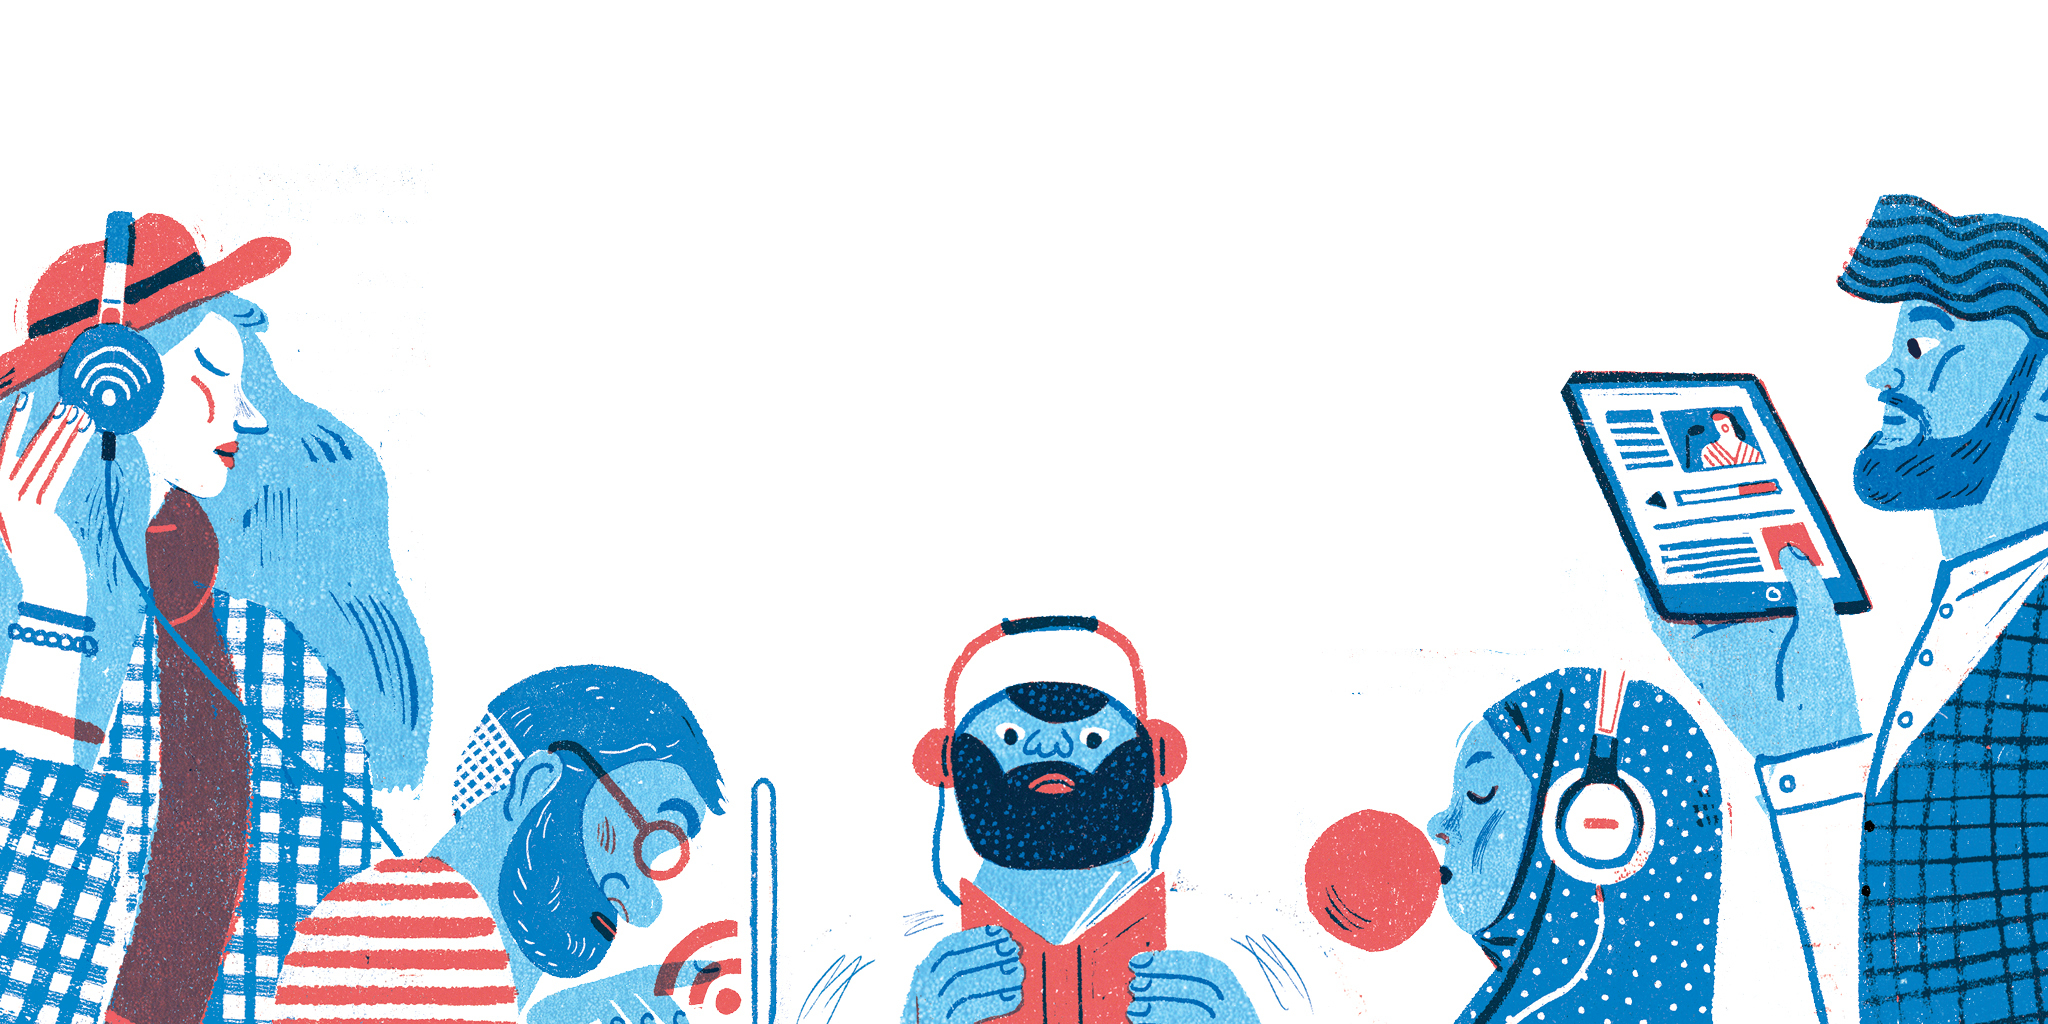 A colorful illustration of people listening to headphones and looking a digital screens